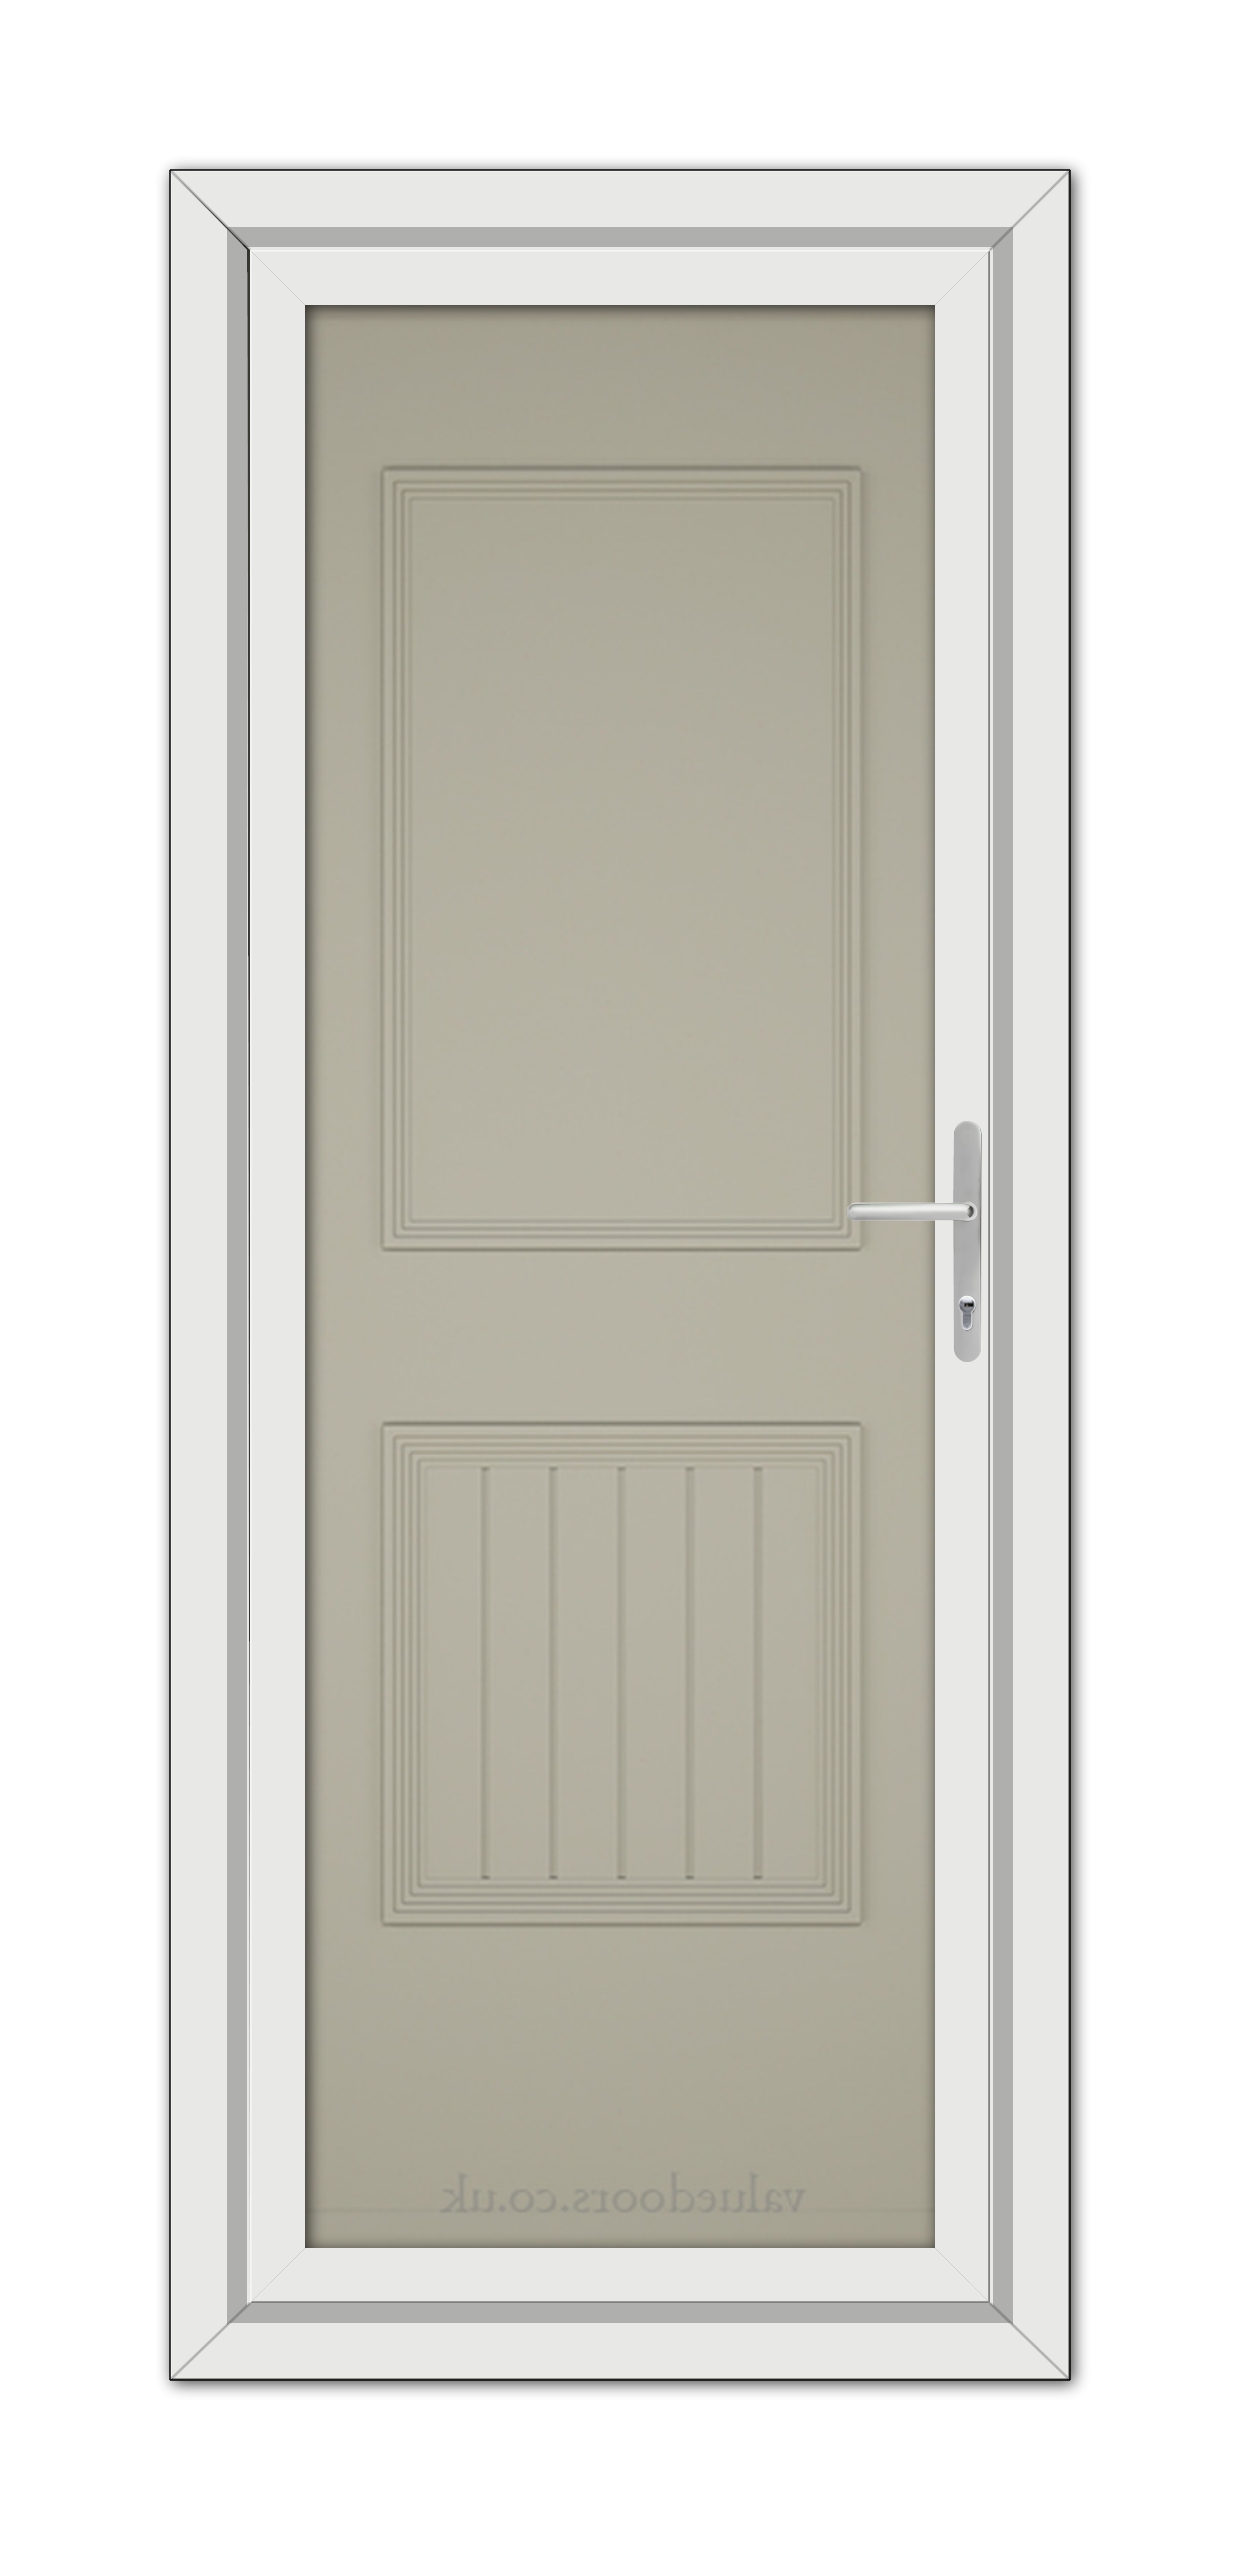 A vertical image of a closed, modern Agate Grey Alnwick One Solid uPVC door with a metal handle, set within a white frame.